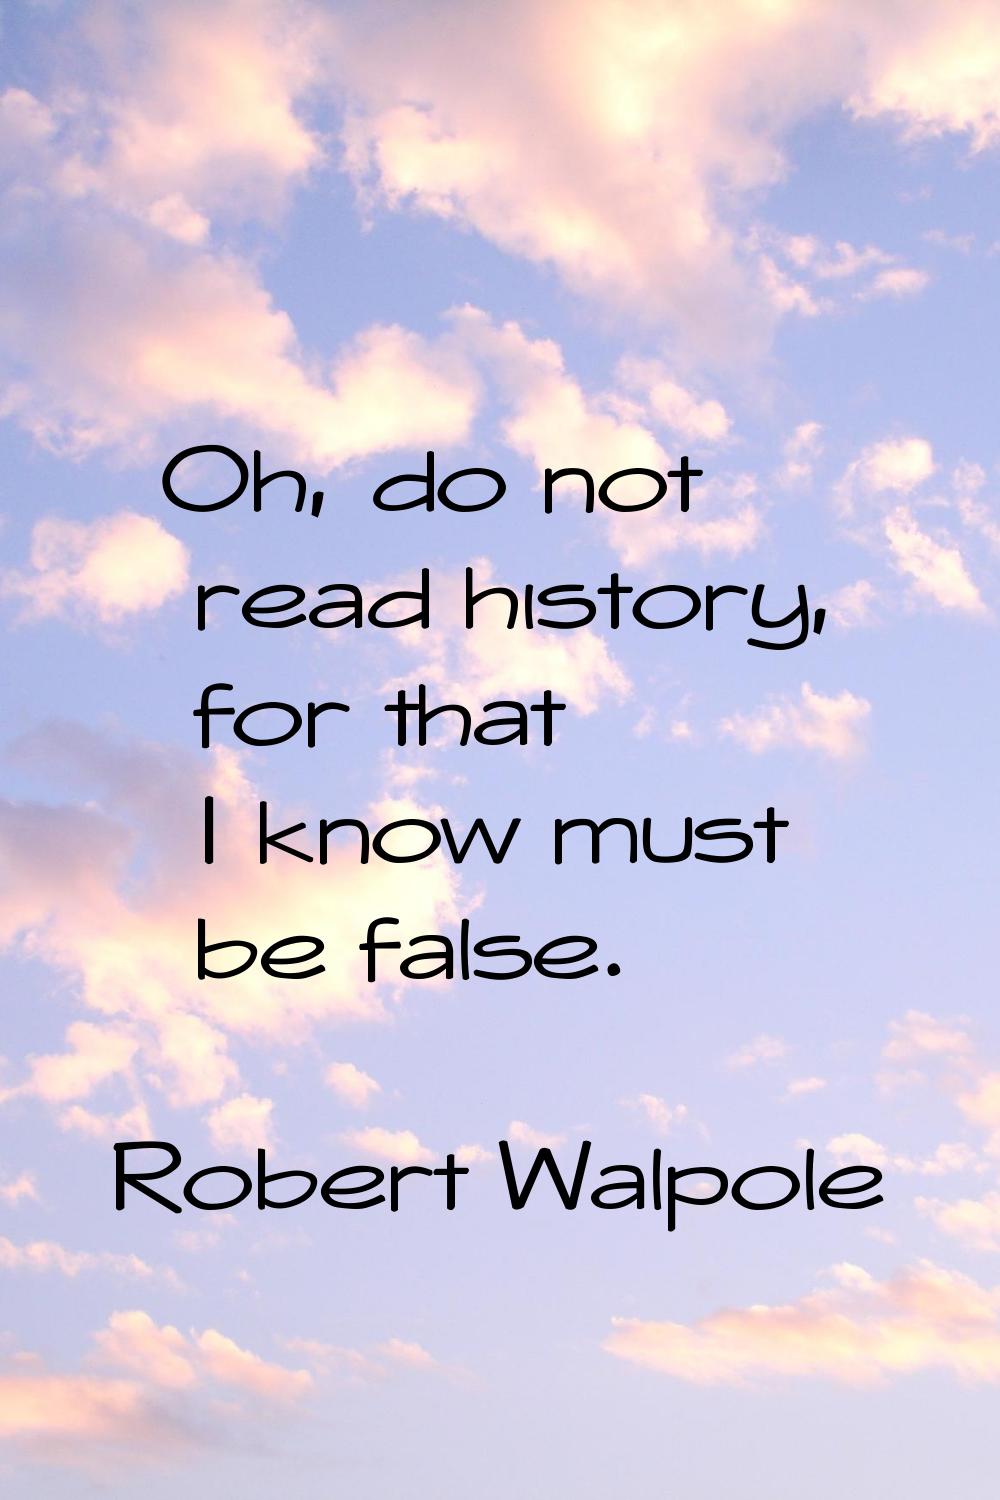 Oh, do not read history, for that I know must be false.